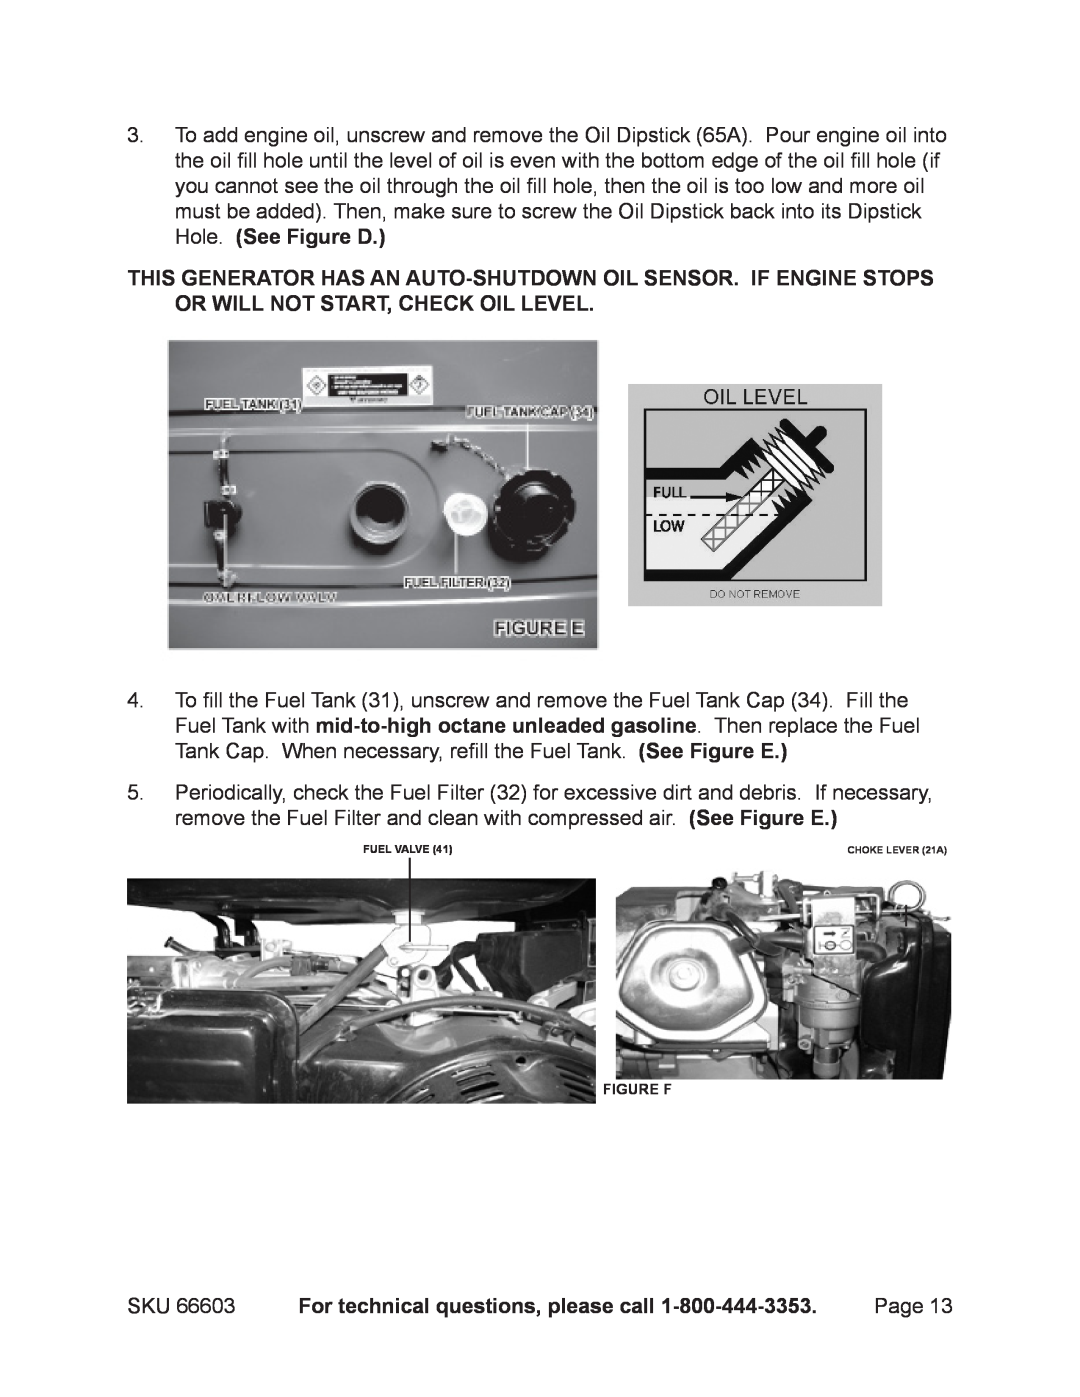 Chicago Electric 66603 manual For technical questions, please call, Figure F, Fuel Valve 